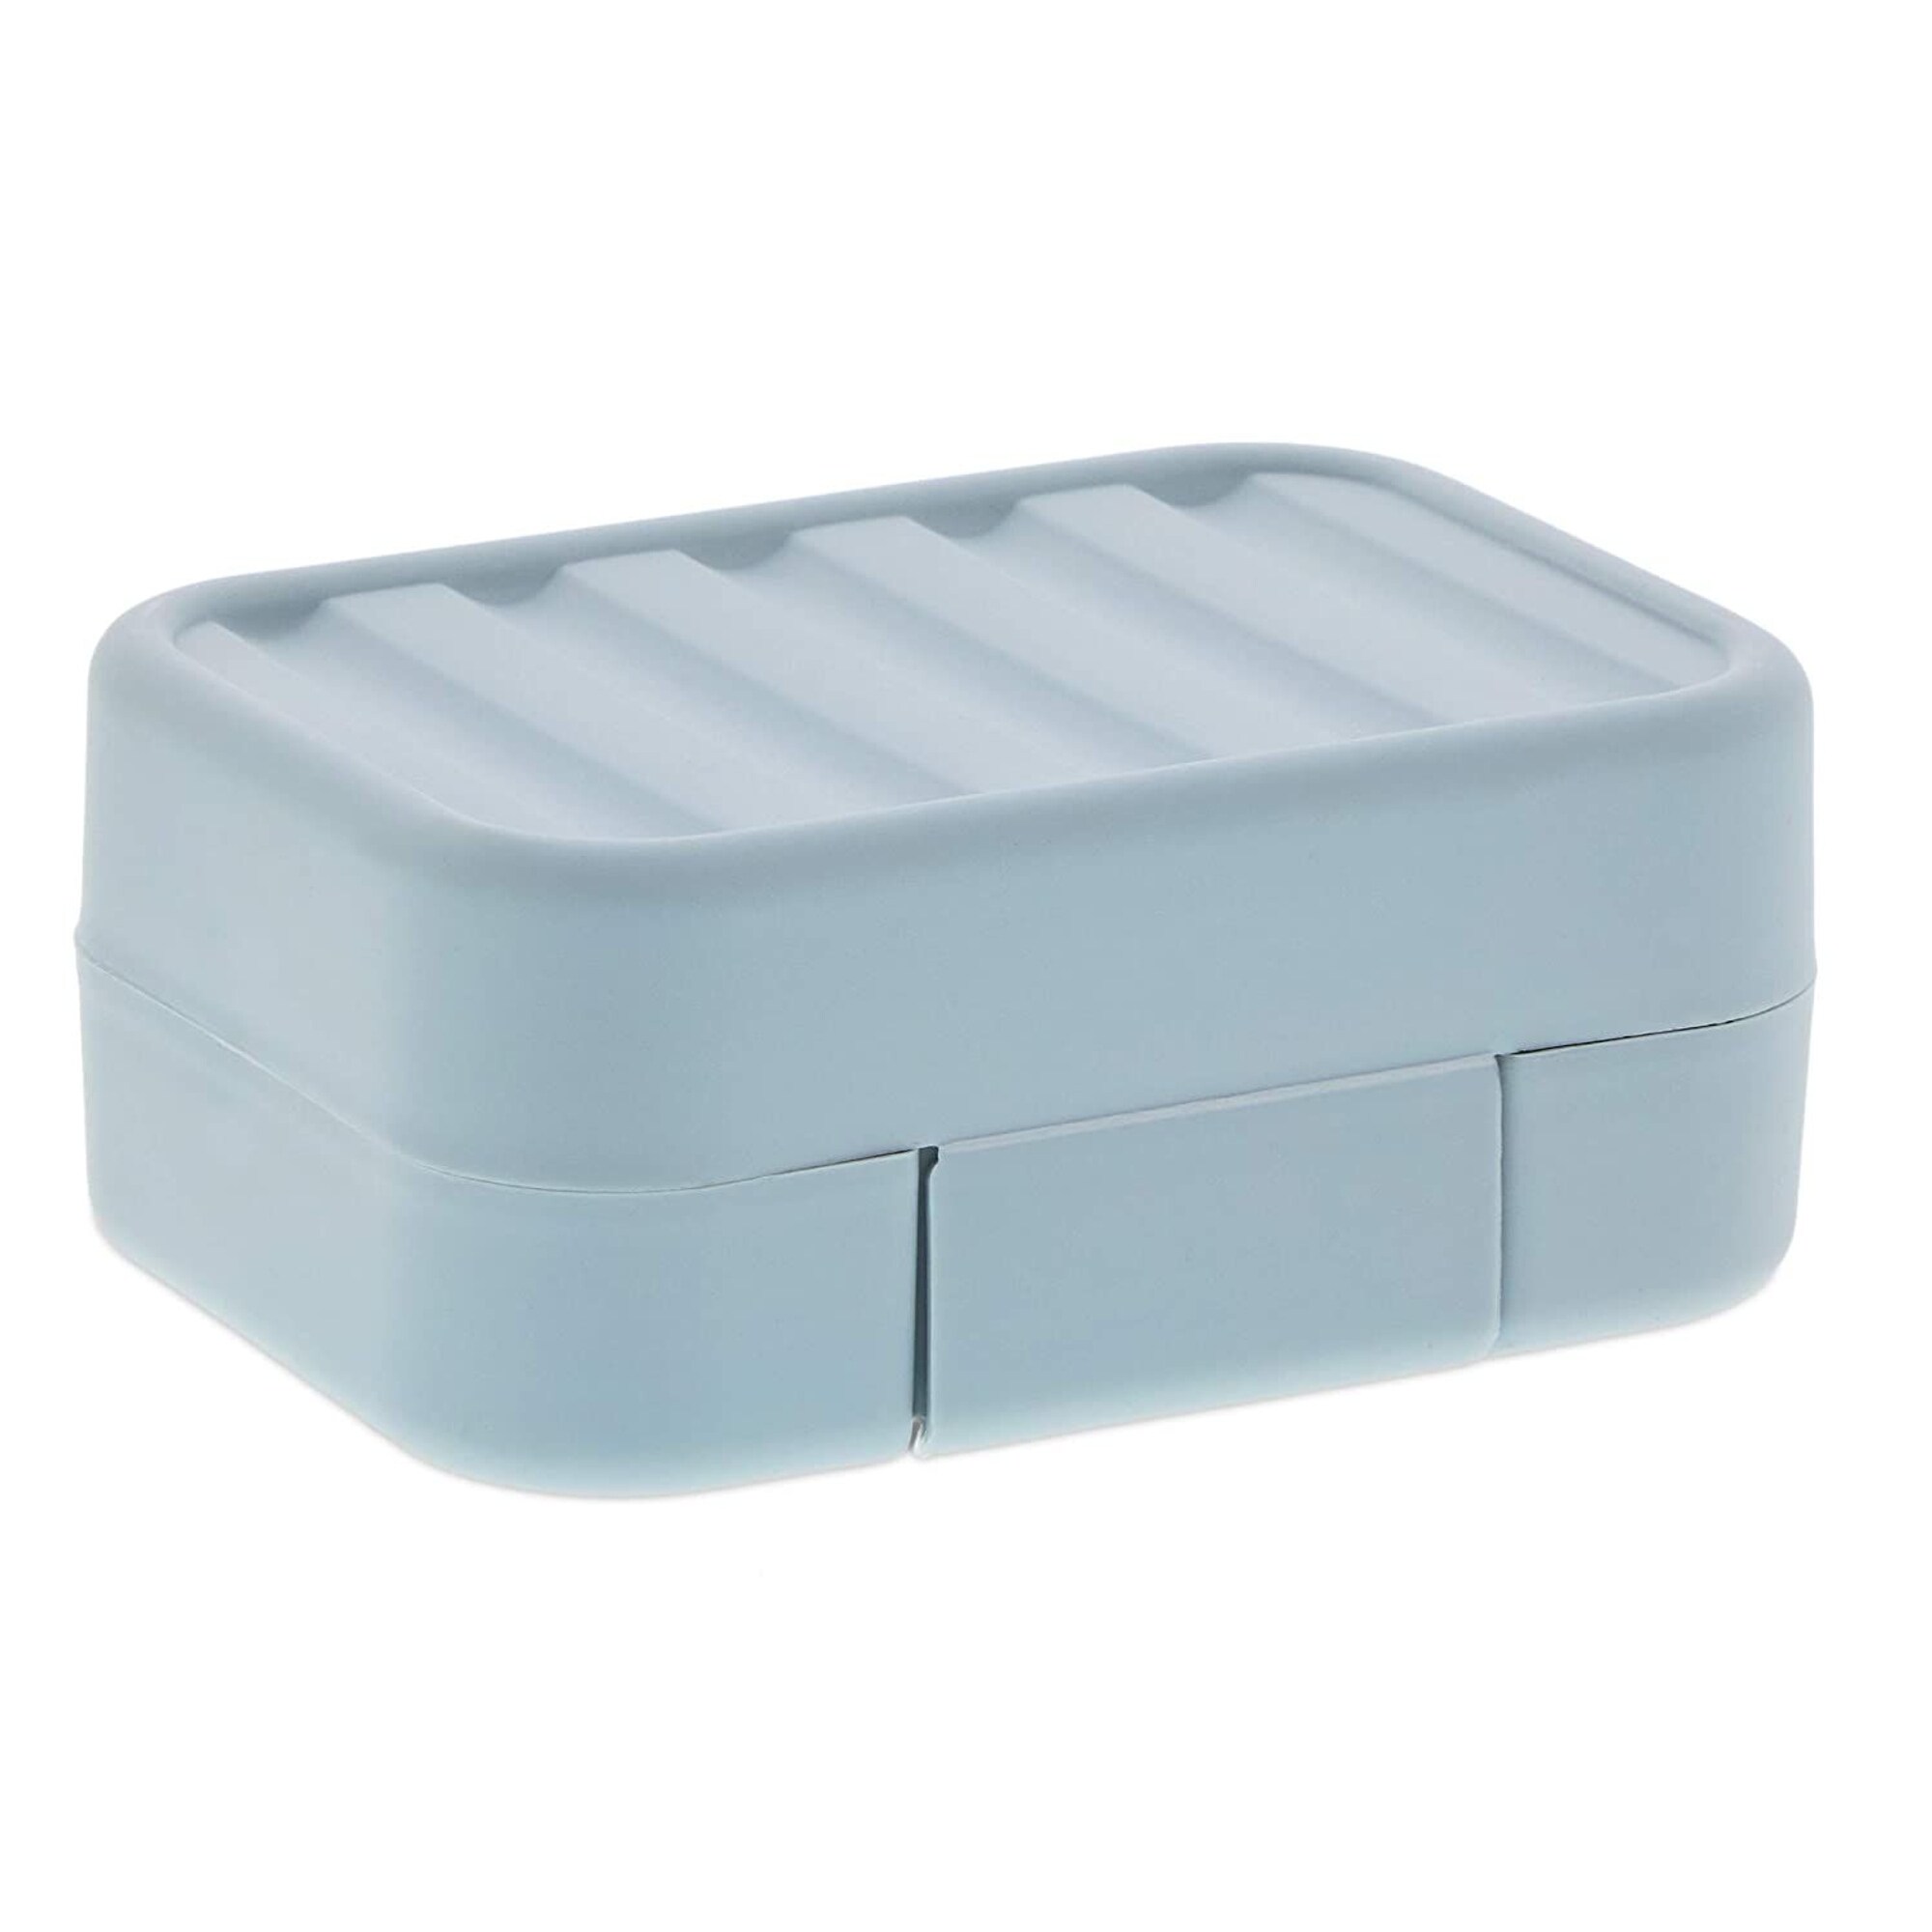 https://ak1.ostkcdn.com/images/products/is/images/direct/815affa00fa2739e2ba4ed5cae72539ffc7795df/Soap-Holder-Travel-Cases-in-4-Colors-%284.5-x-1.8-x-3.3-in%2C-4-Pack%29.jpg